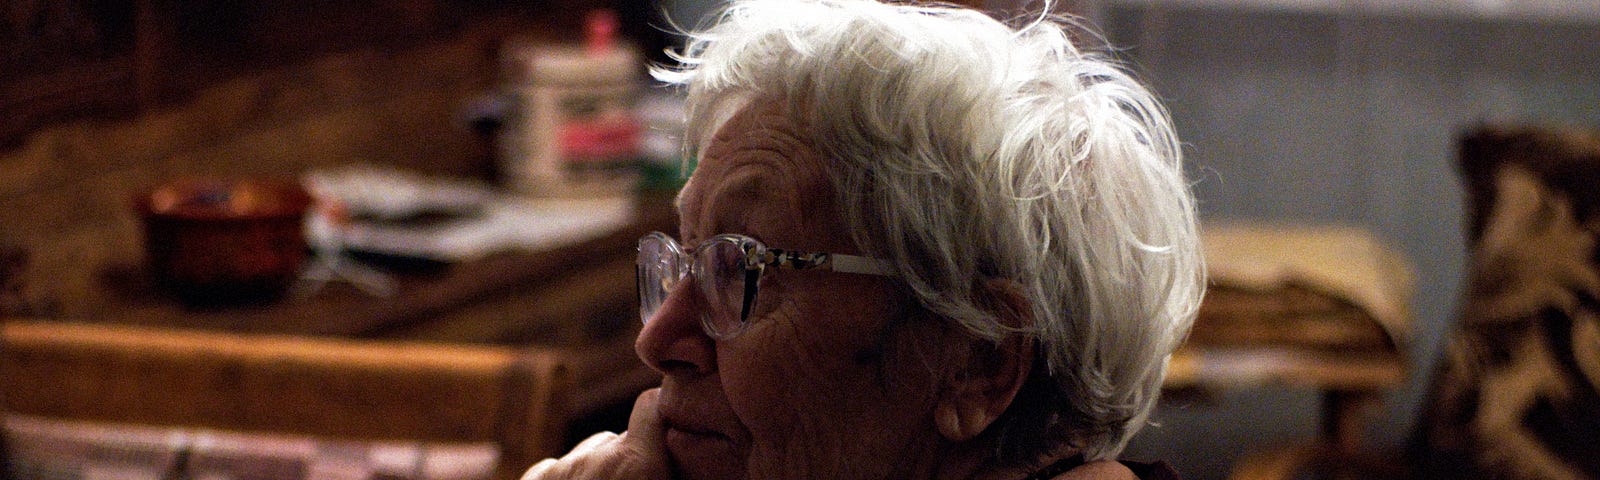 Elder woman with white hair sitting alone at a table